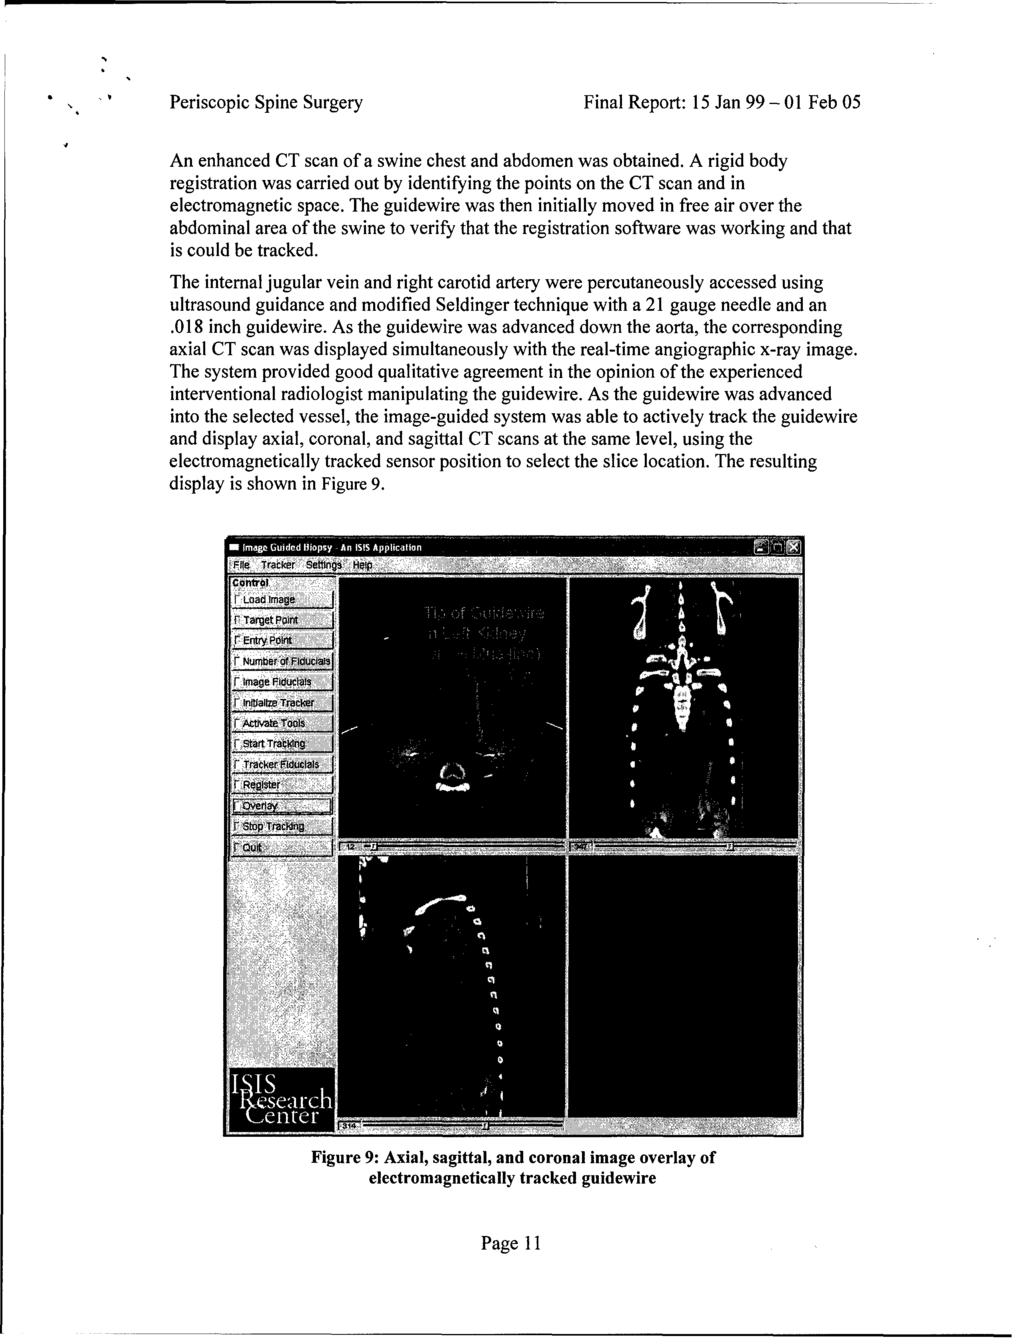 Periscopic Spine Surgery Final Report: 15 Jan 99-01 Feb 05 An enhanced CT scan of a swine chest and abdomen was obtained.